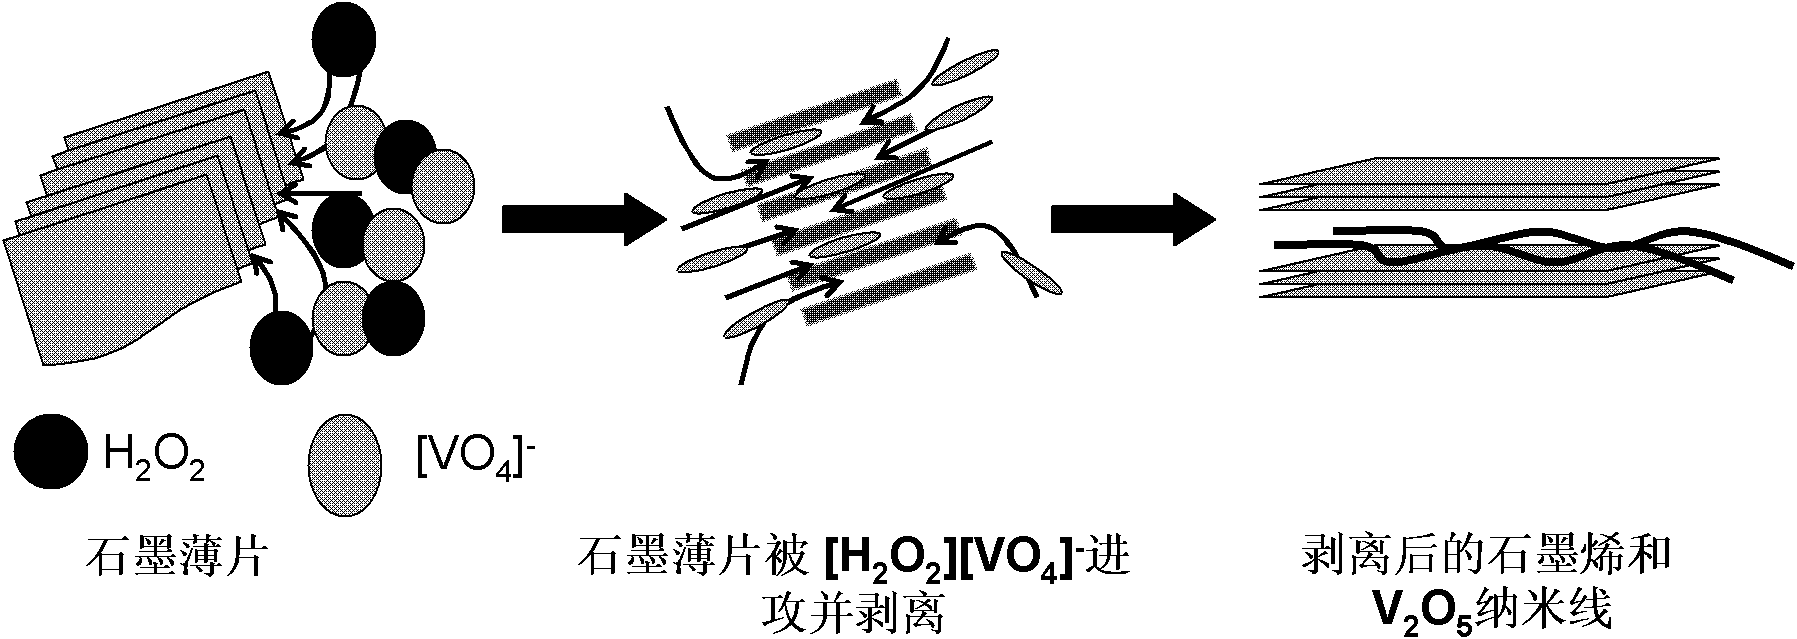 Ultra-long single crystal V2O5 nano wire/graphene anode material and preparation method